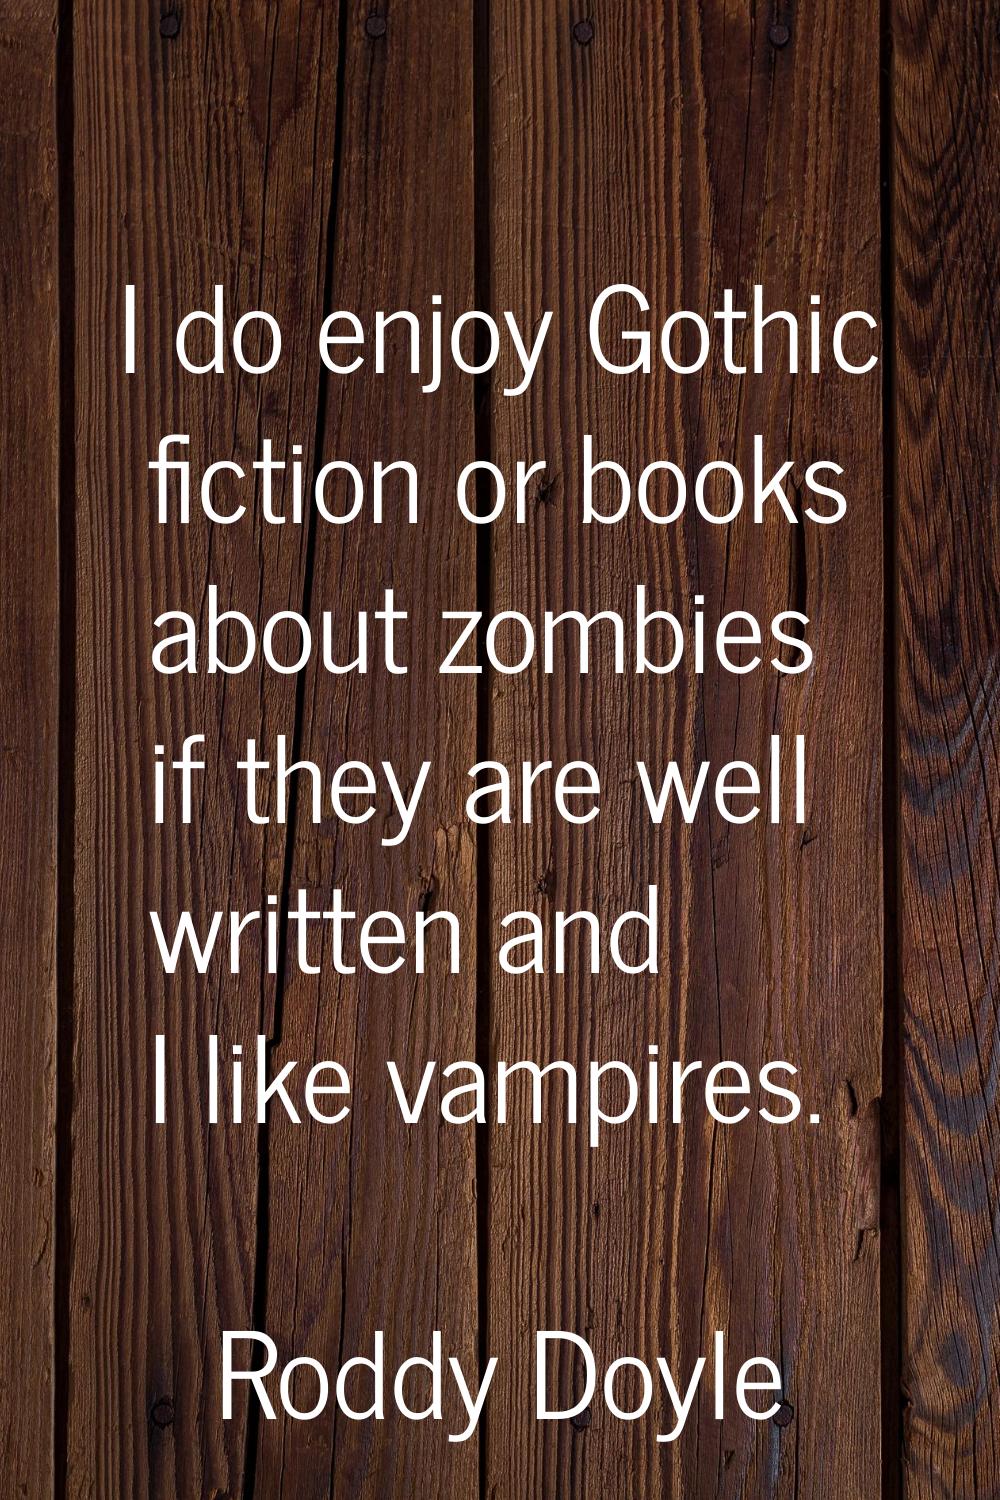 I do enjoy Gothic fiction or books about zombies if they are well written and I like vampires.